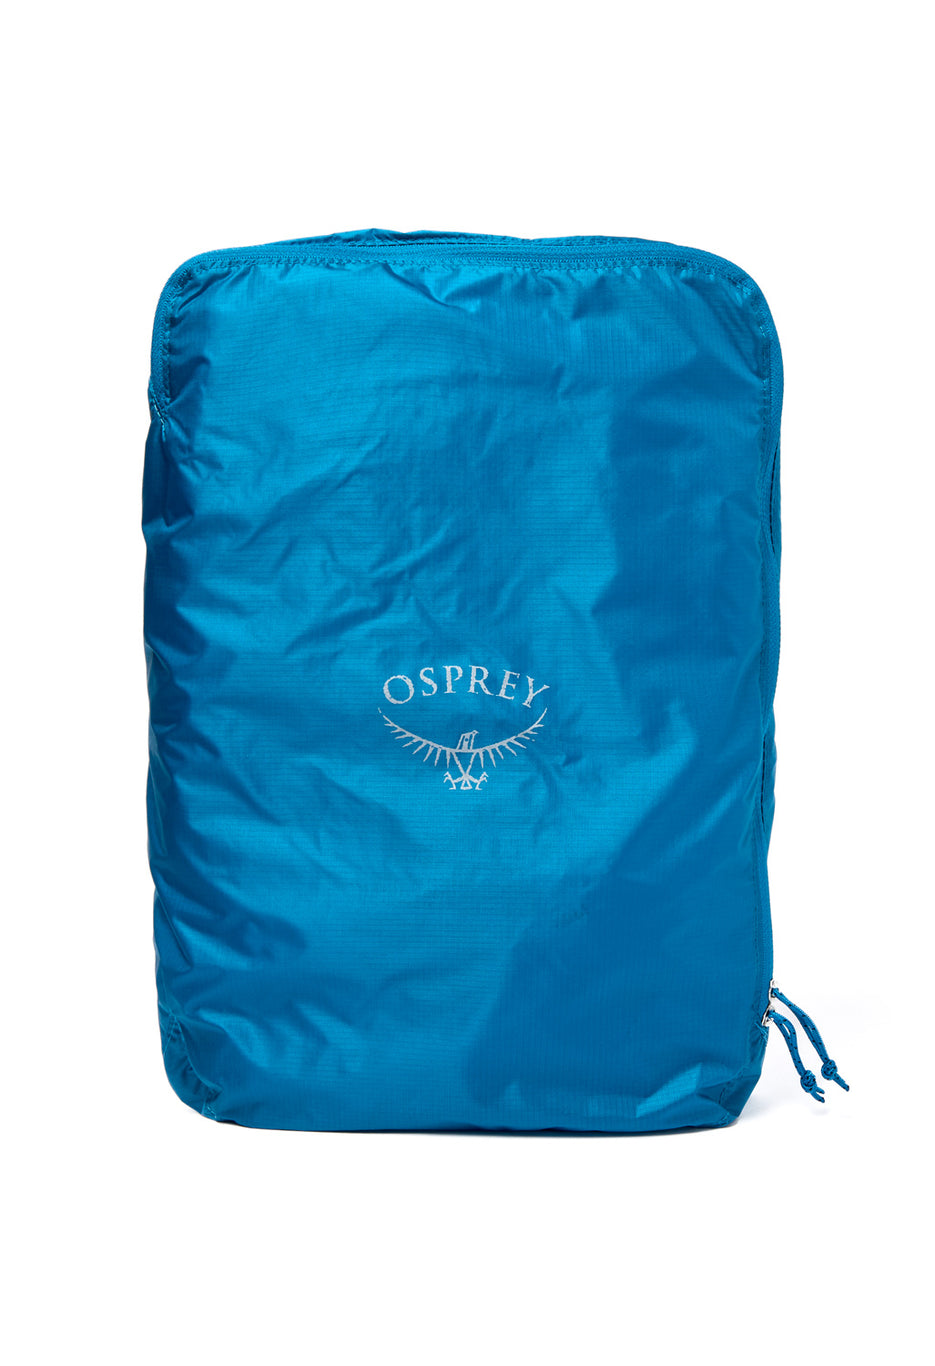 Osprey Packing Cube Large - Waterfront Blue